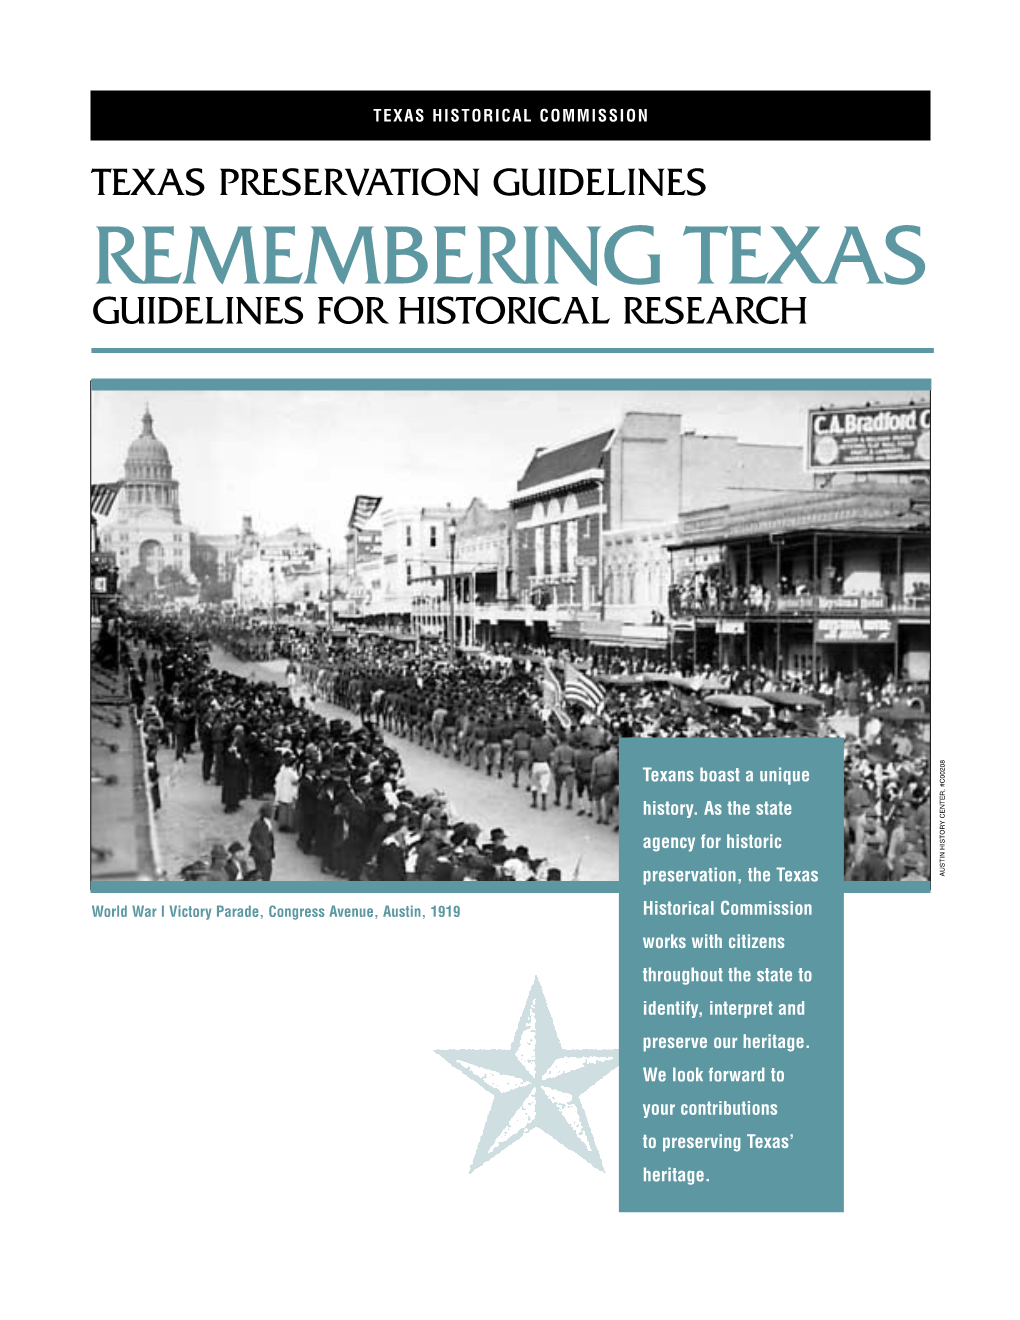 Remembering Texas: Guidelines to Historical Research